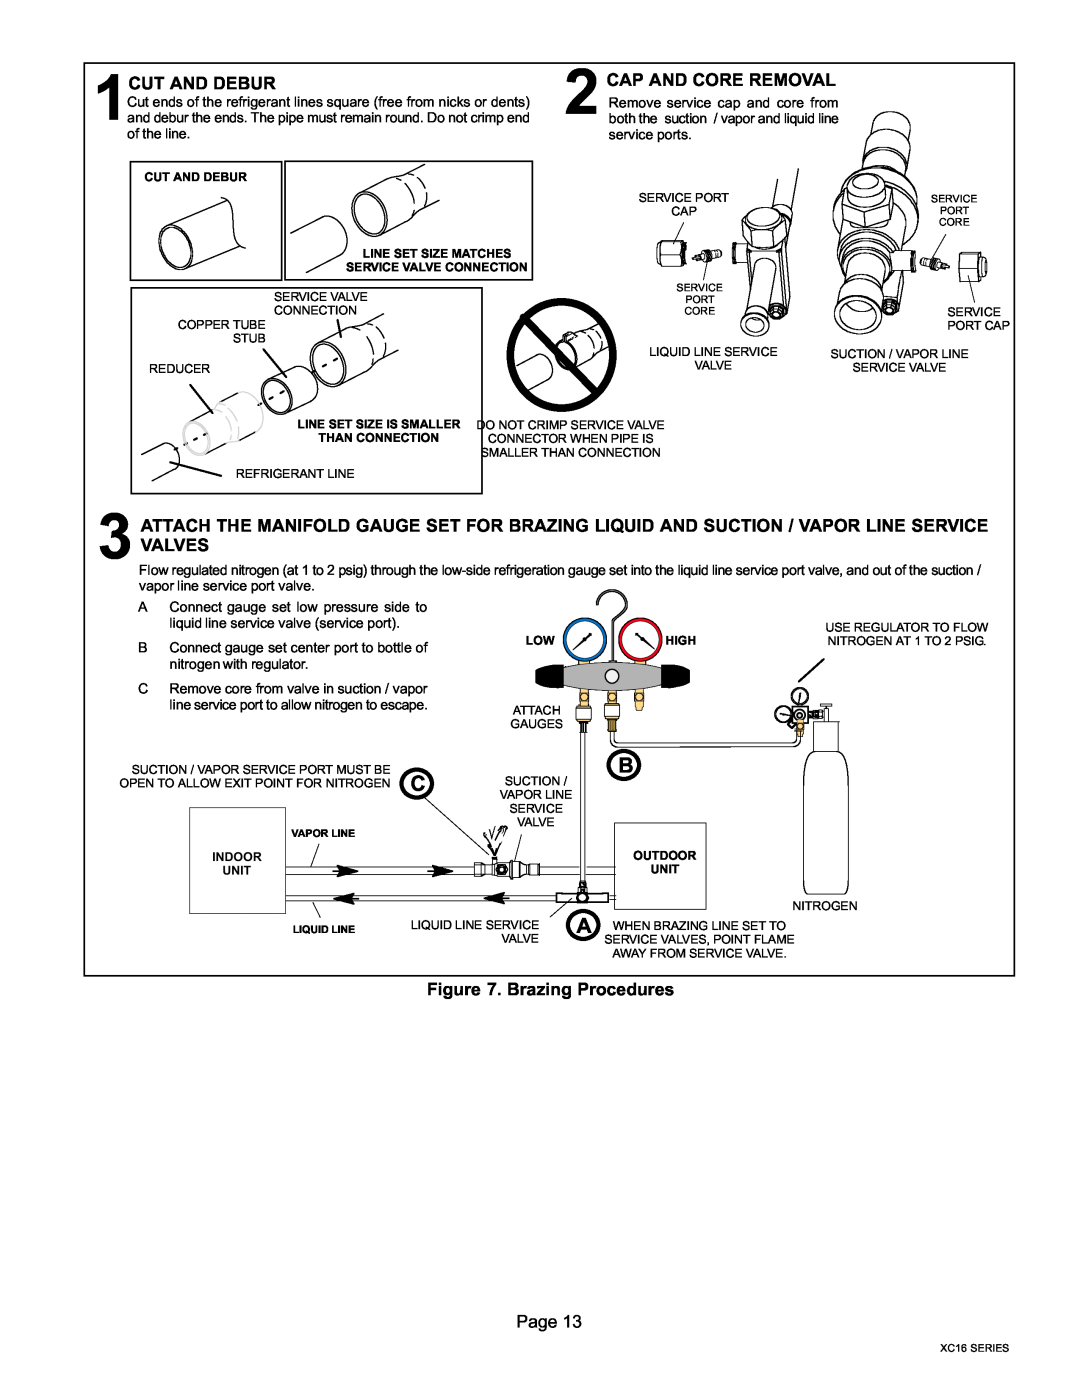 Lenox Elite Series X16 Air Conditioner Units, 506637-01 installation instructions 1CUT AND DEBUR, Brazing Procedures Page 